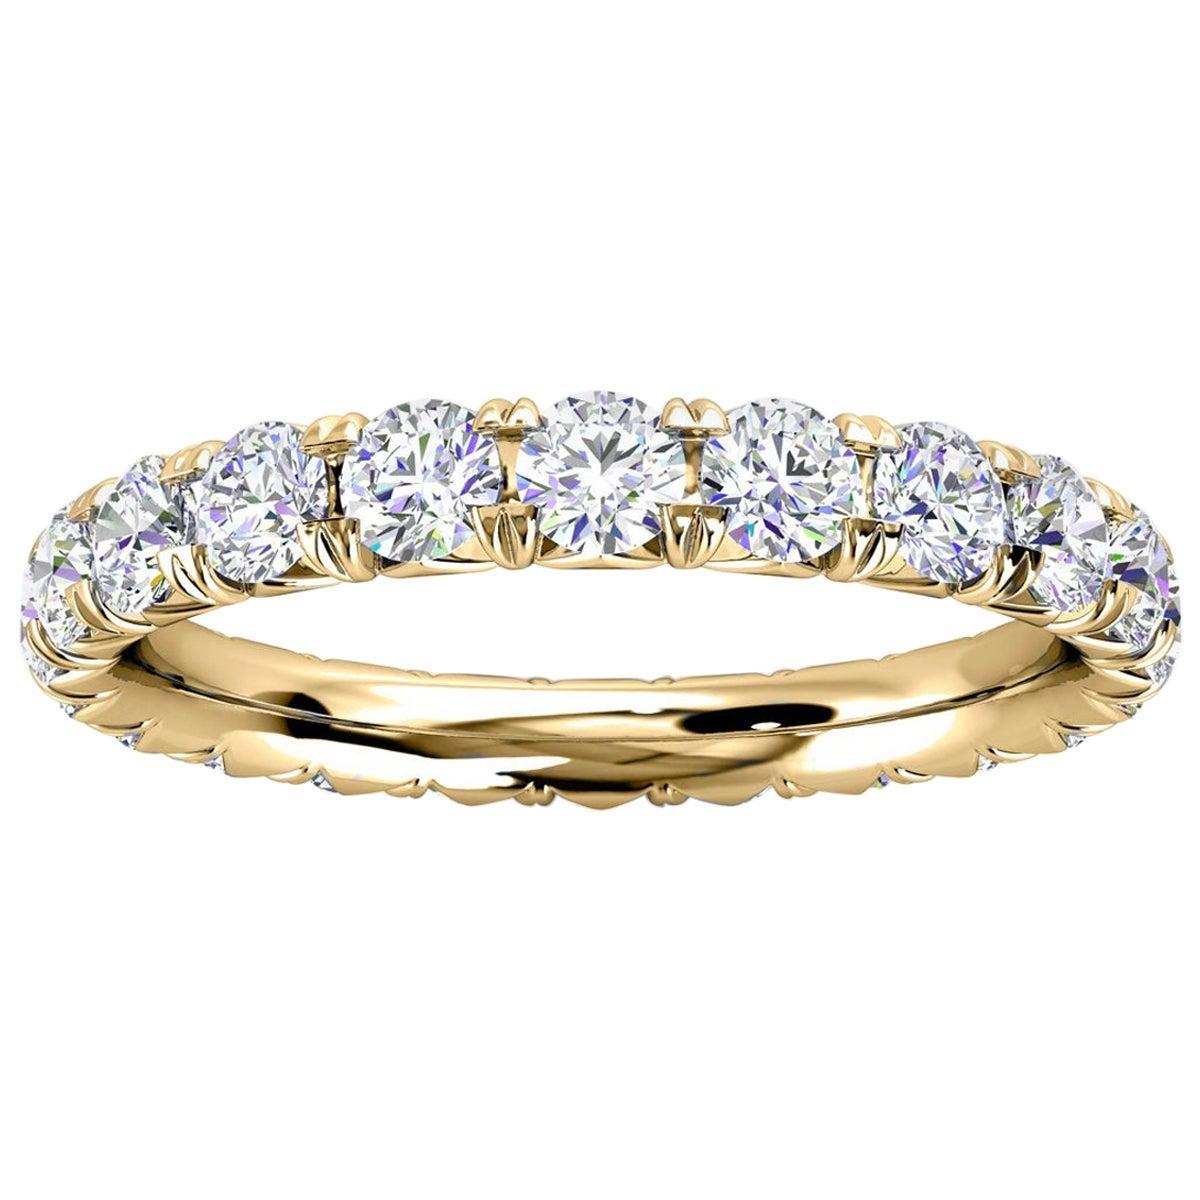 For Sale:  18k Yellow Gold Mia French Pave Diamond Eternity Ring '1 1/2 Ct. tw'